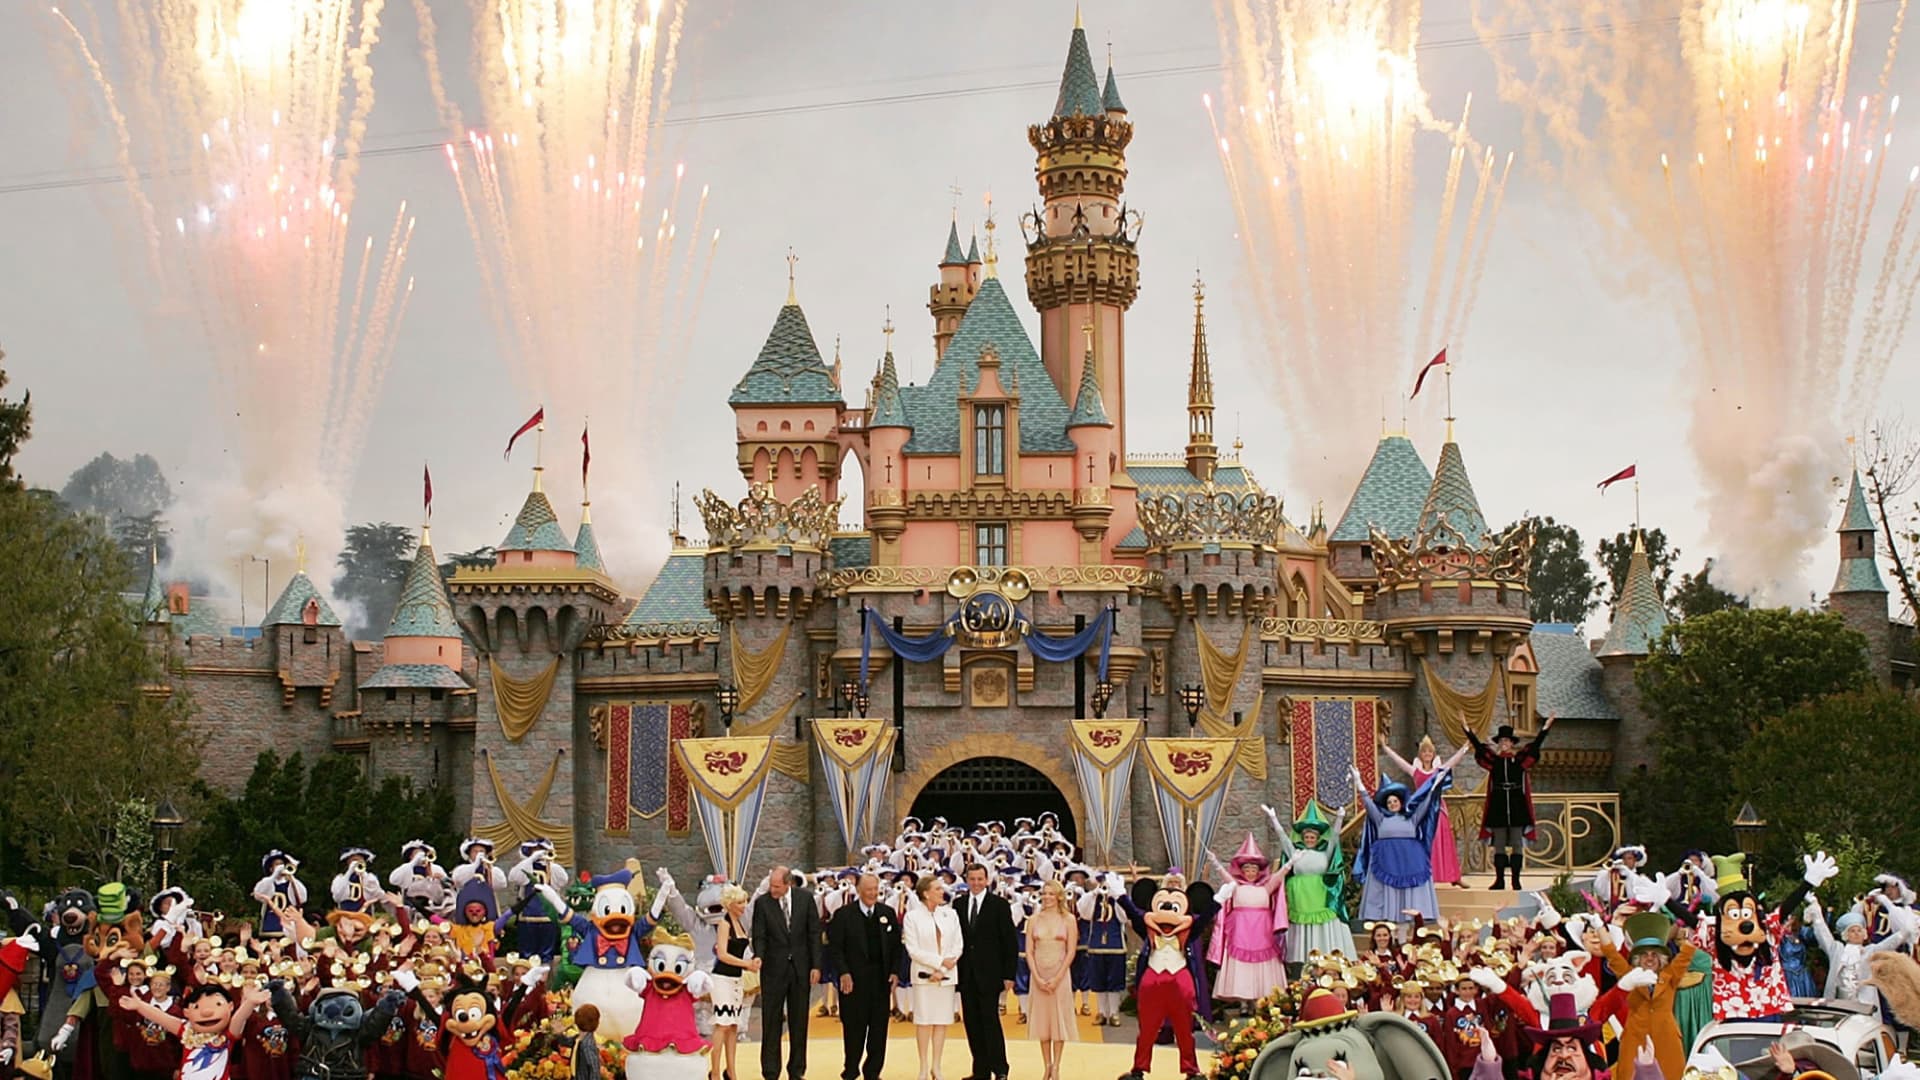 This is how much Disneyland cost when it opened